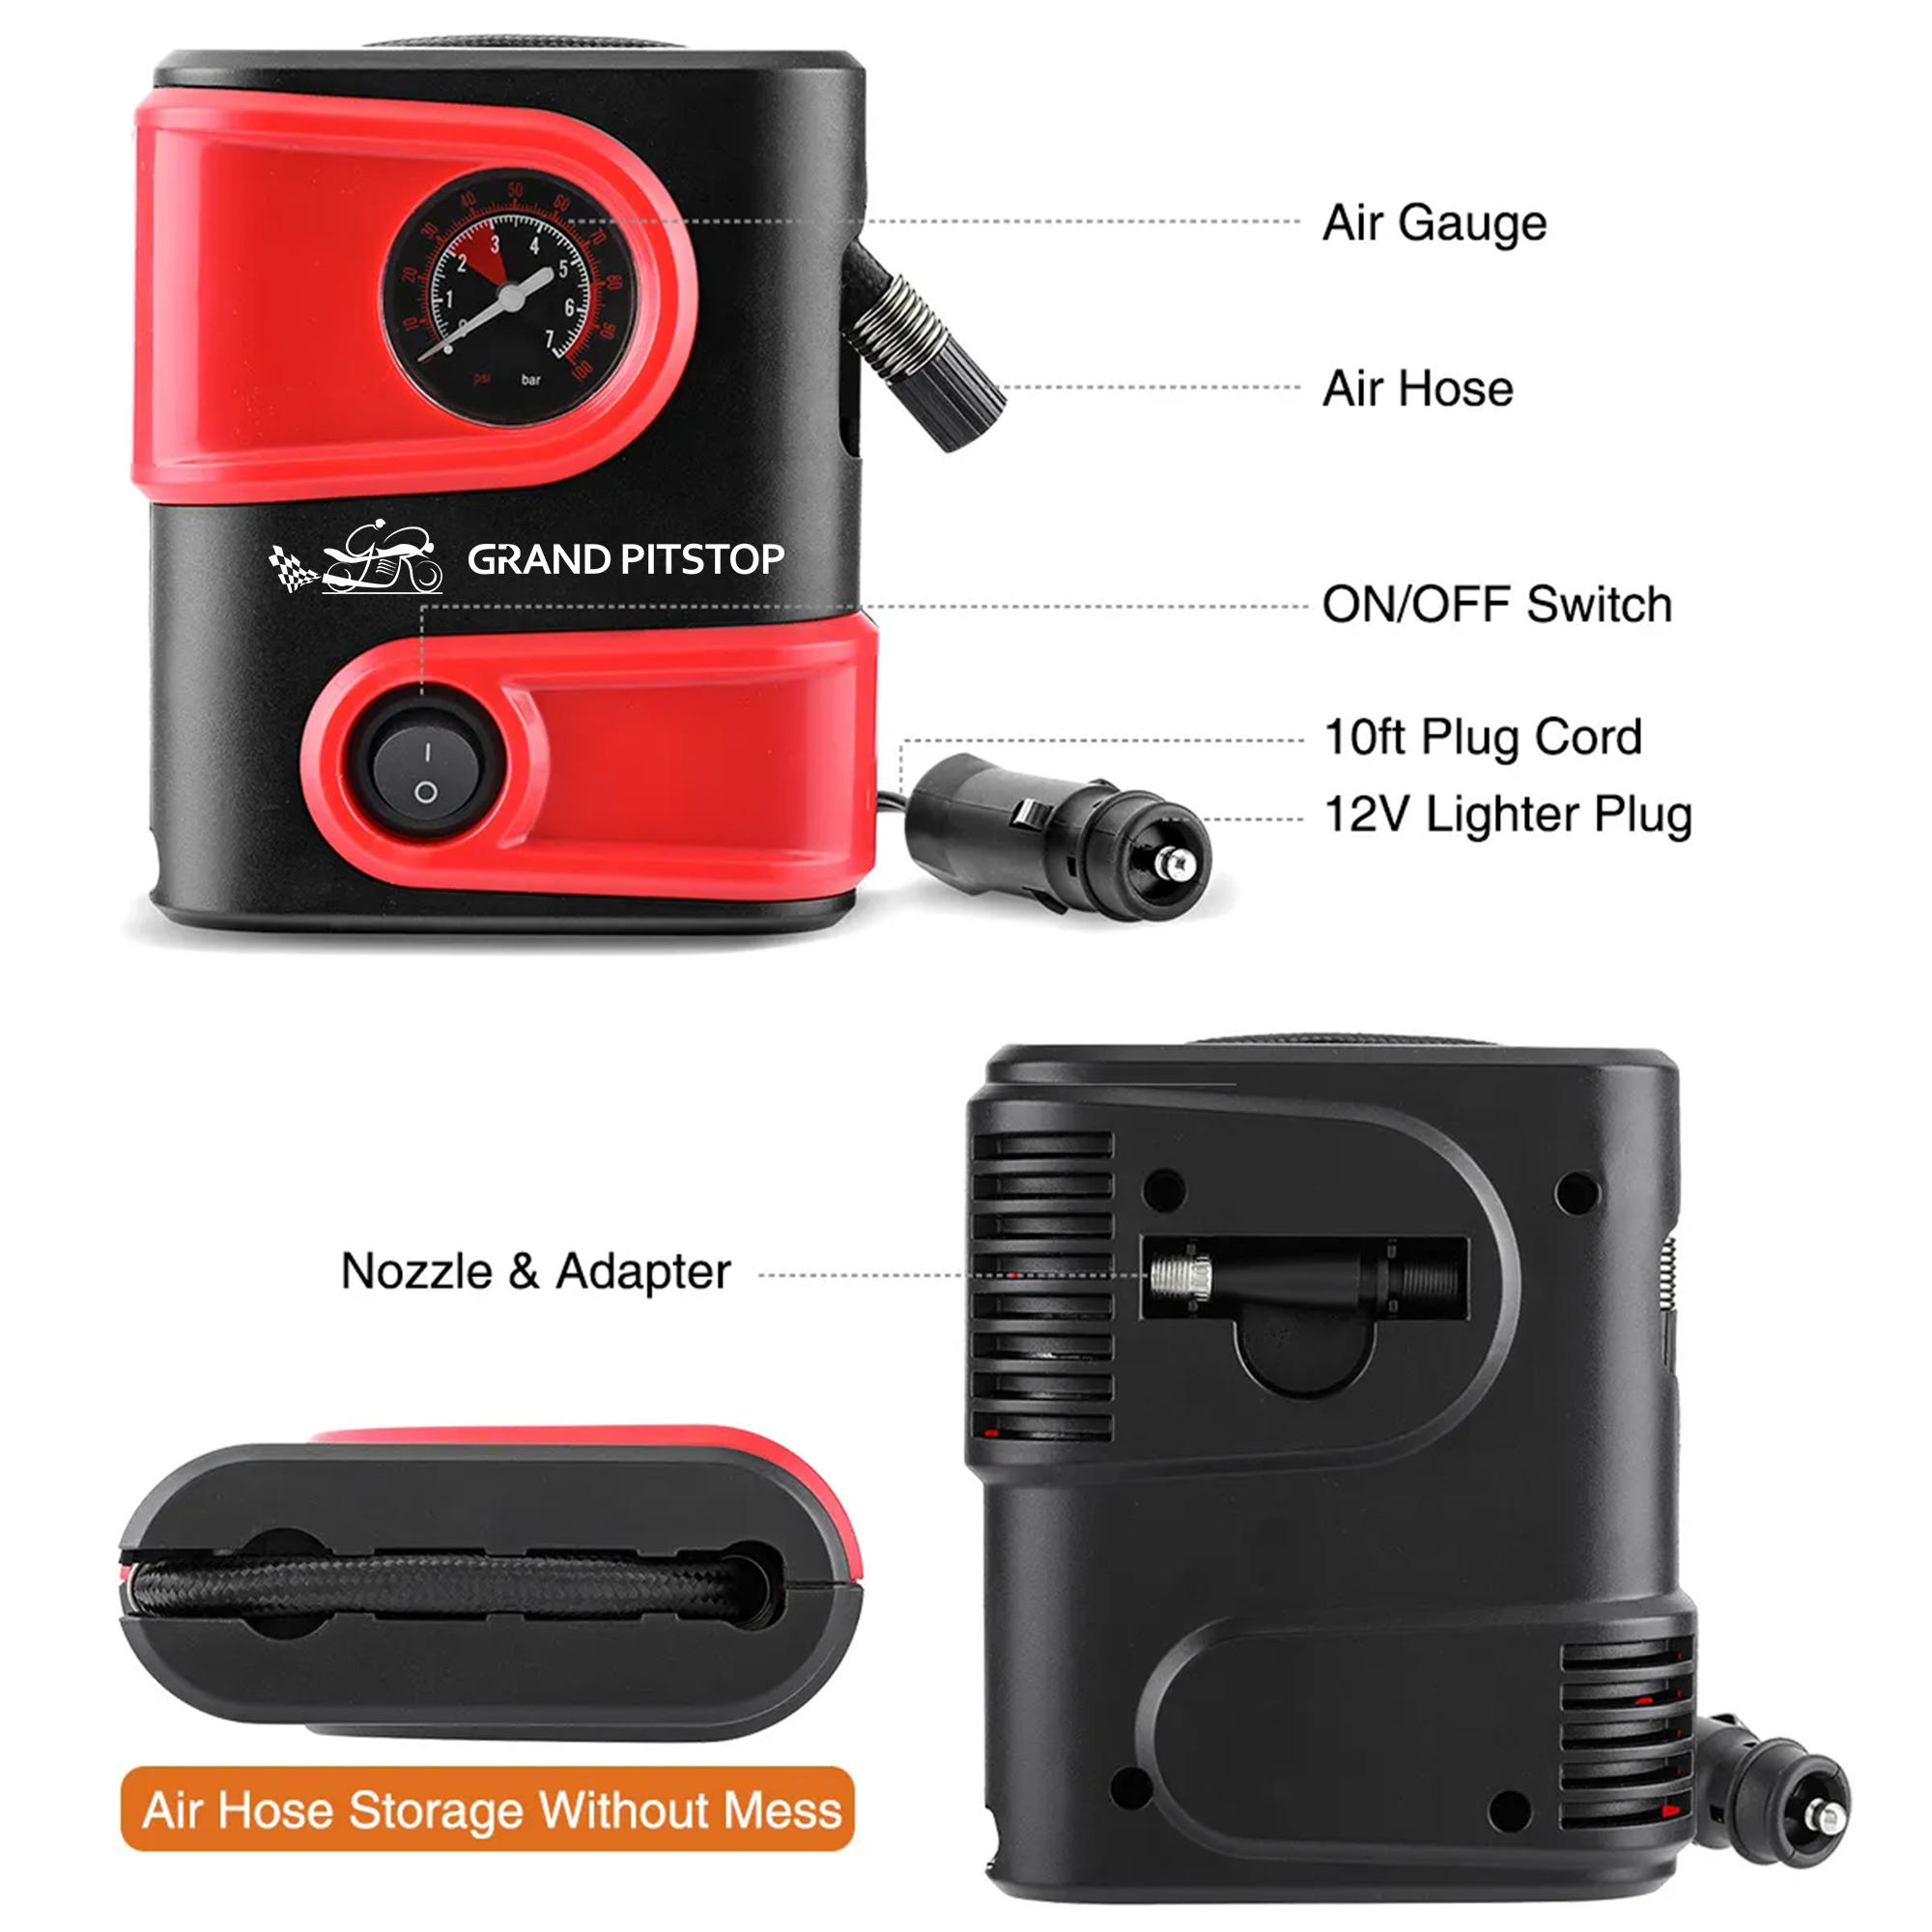 GPS Tyre Inflator Red